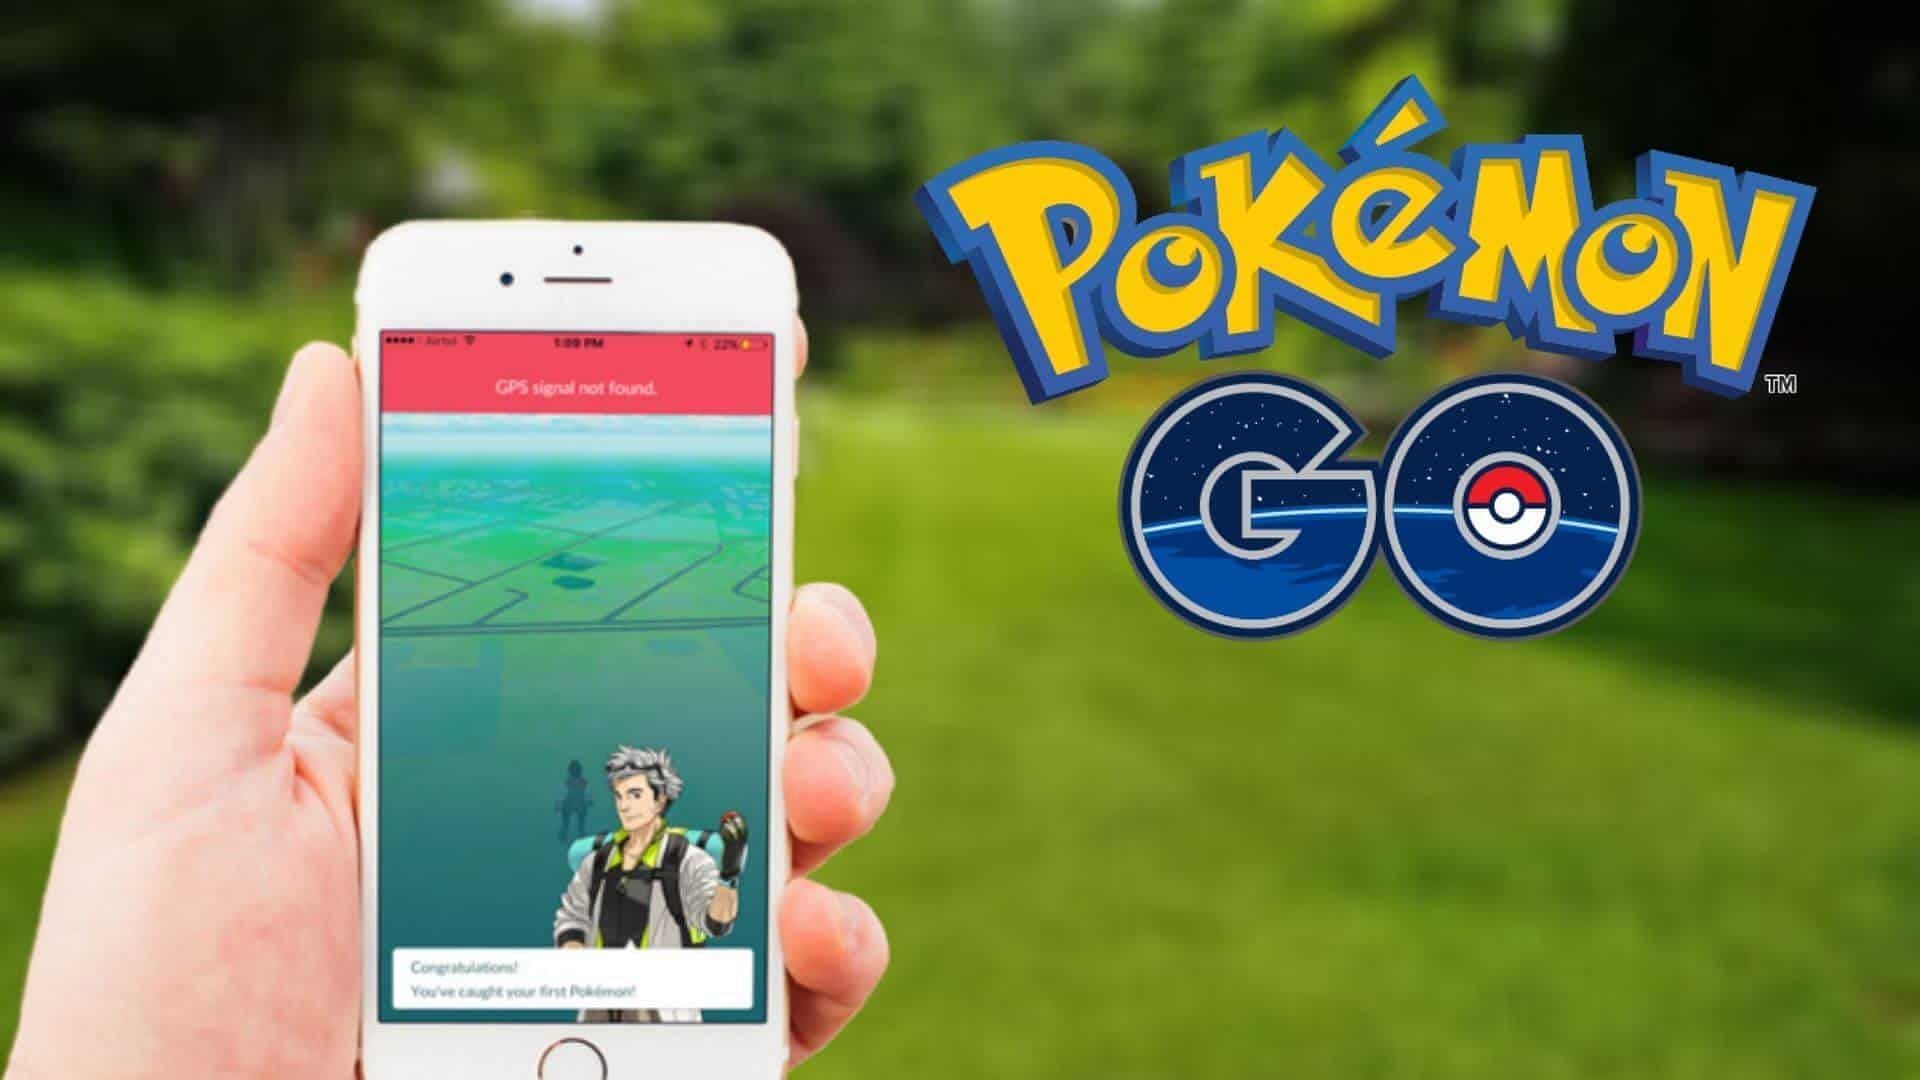 Pokemon GO GPS signal not found error fixes and possible reasons (Image via Niantic)